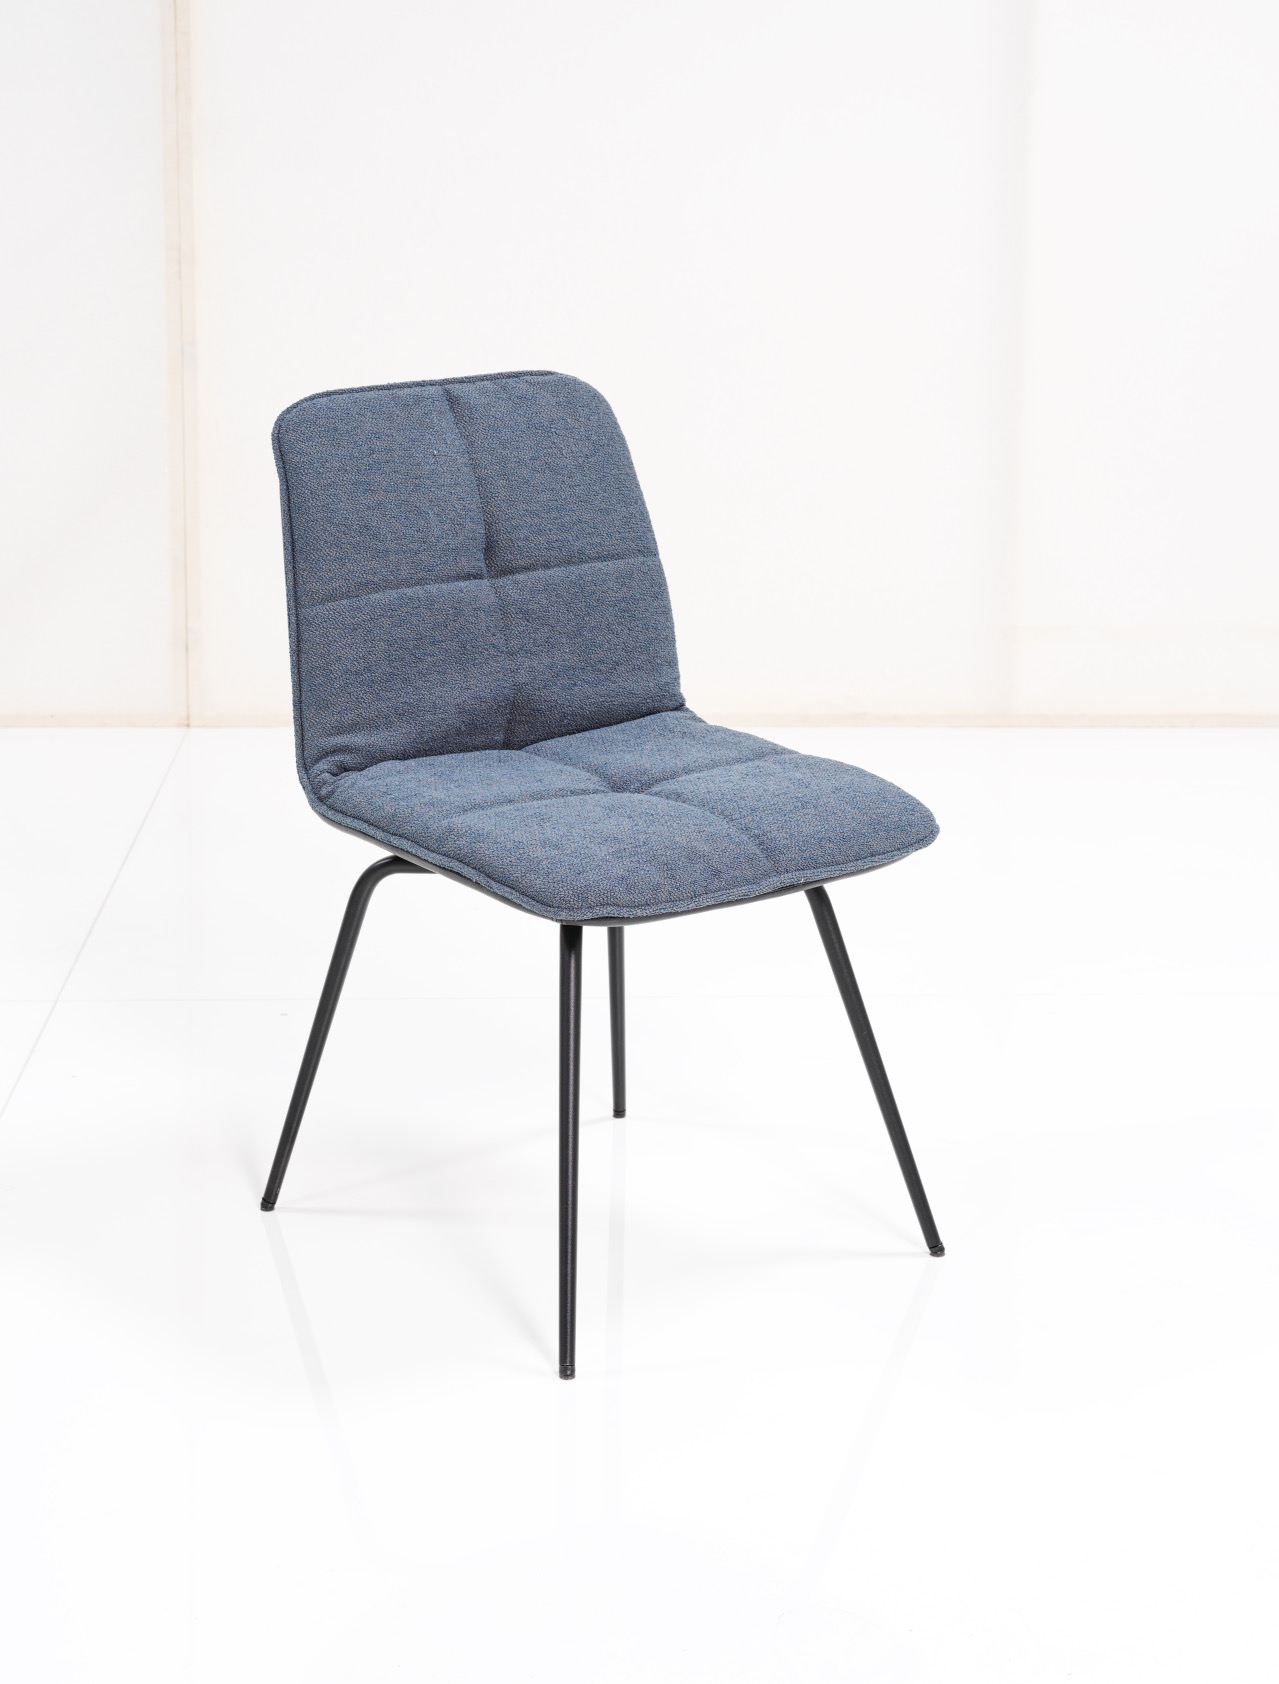 Shilo chair in blue fabric and black four leg base